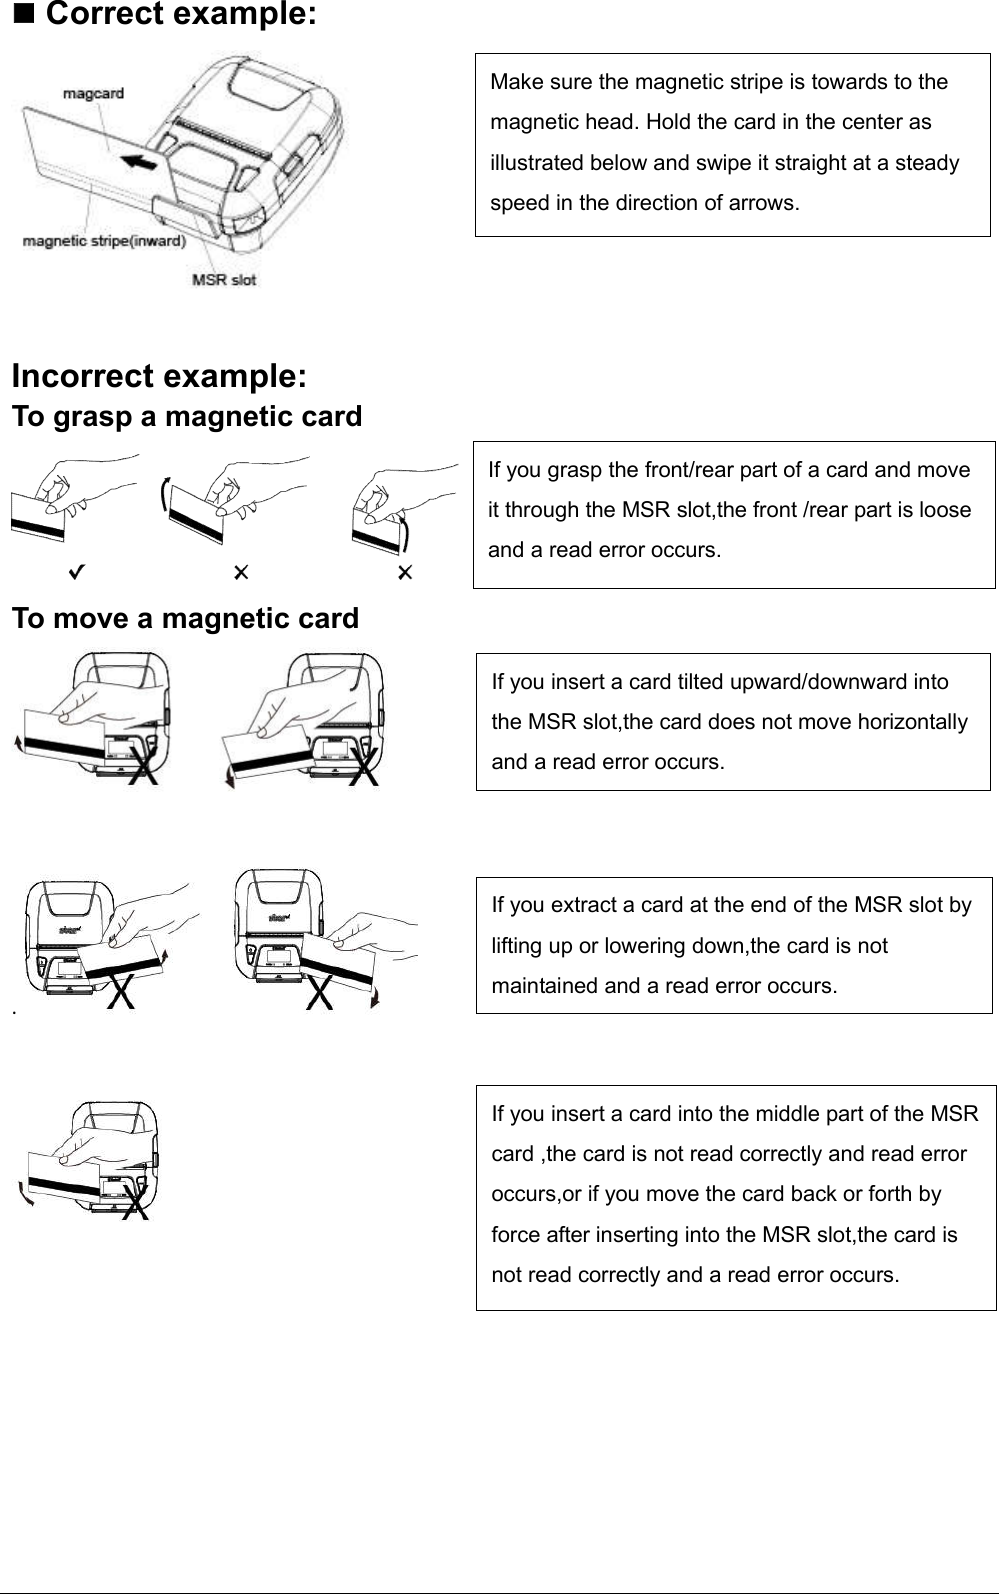    Correct example:   Incorrect example: To grasp a magnetic card To move a magnetic card   .           If you grasp the front/rear part of a card and move it through the MSR slot,the front /rear part is loose and a read error occurs. If you insert a card tilted upward/downward into the MSR slot,the card does not move horizontally and a read error occurs. If you extract a card at the end of the MSR slot by lifting up or lowering down,the card is not maintained and a read error occurs. If you insert a card into the middle part of the MSR card ,the card is not read correctly and read error occurs,or if you move the card back or forth by force after inserting into the MSR slot,the card is not read correctly and a read error occurs. Make sure the magnetic stripe is towards to the magnetic head. Hold the card in the center as illustrated below and swipe it straight at a steady speed in the direction of arrows. 